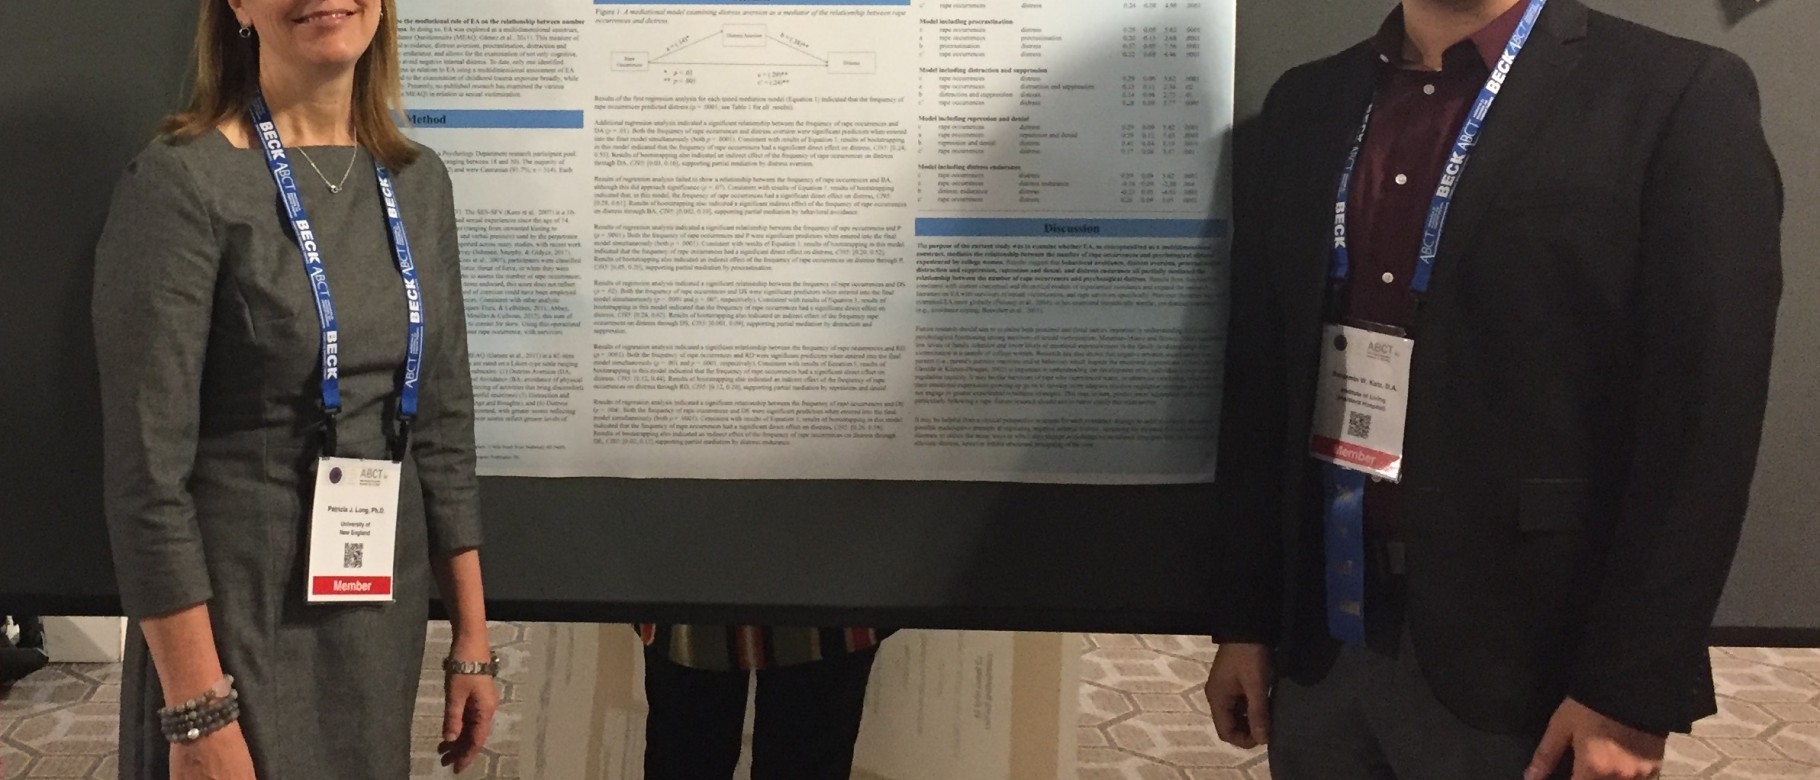 Patricia Long and Ben Katz at the annual meeting of the Association for Behavioral and Cognitive Therapies 